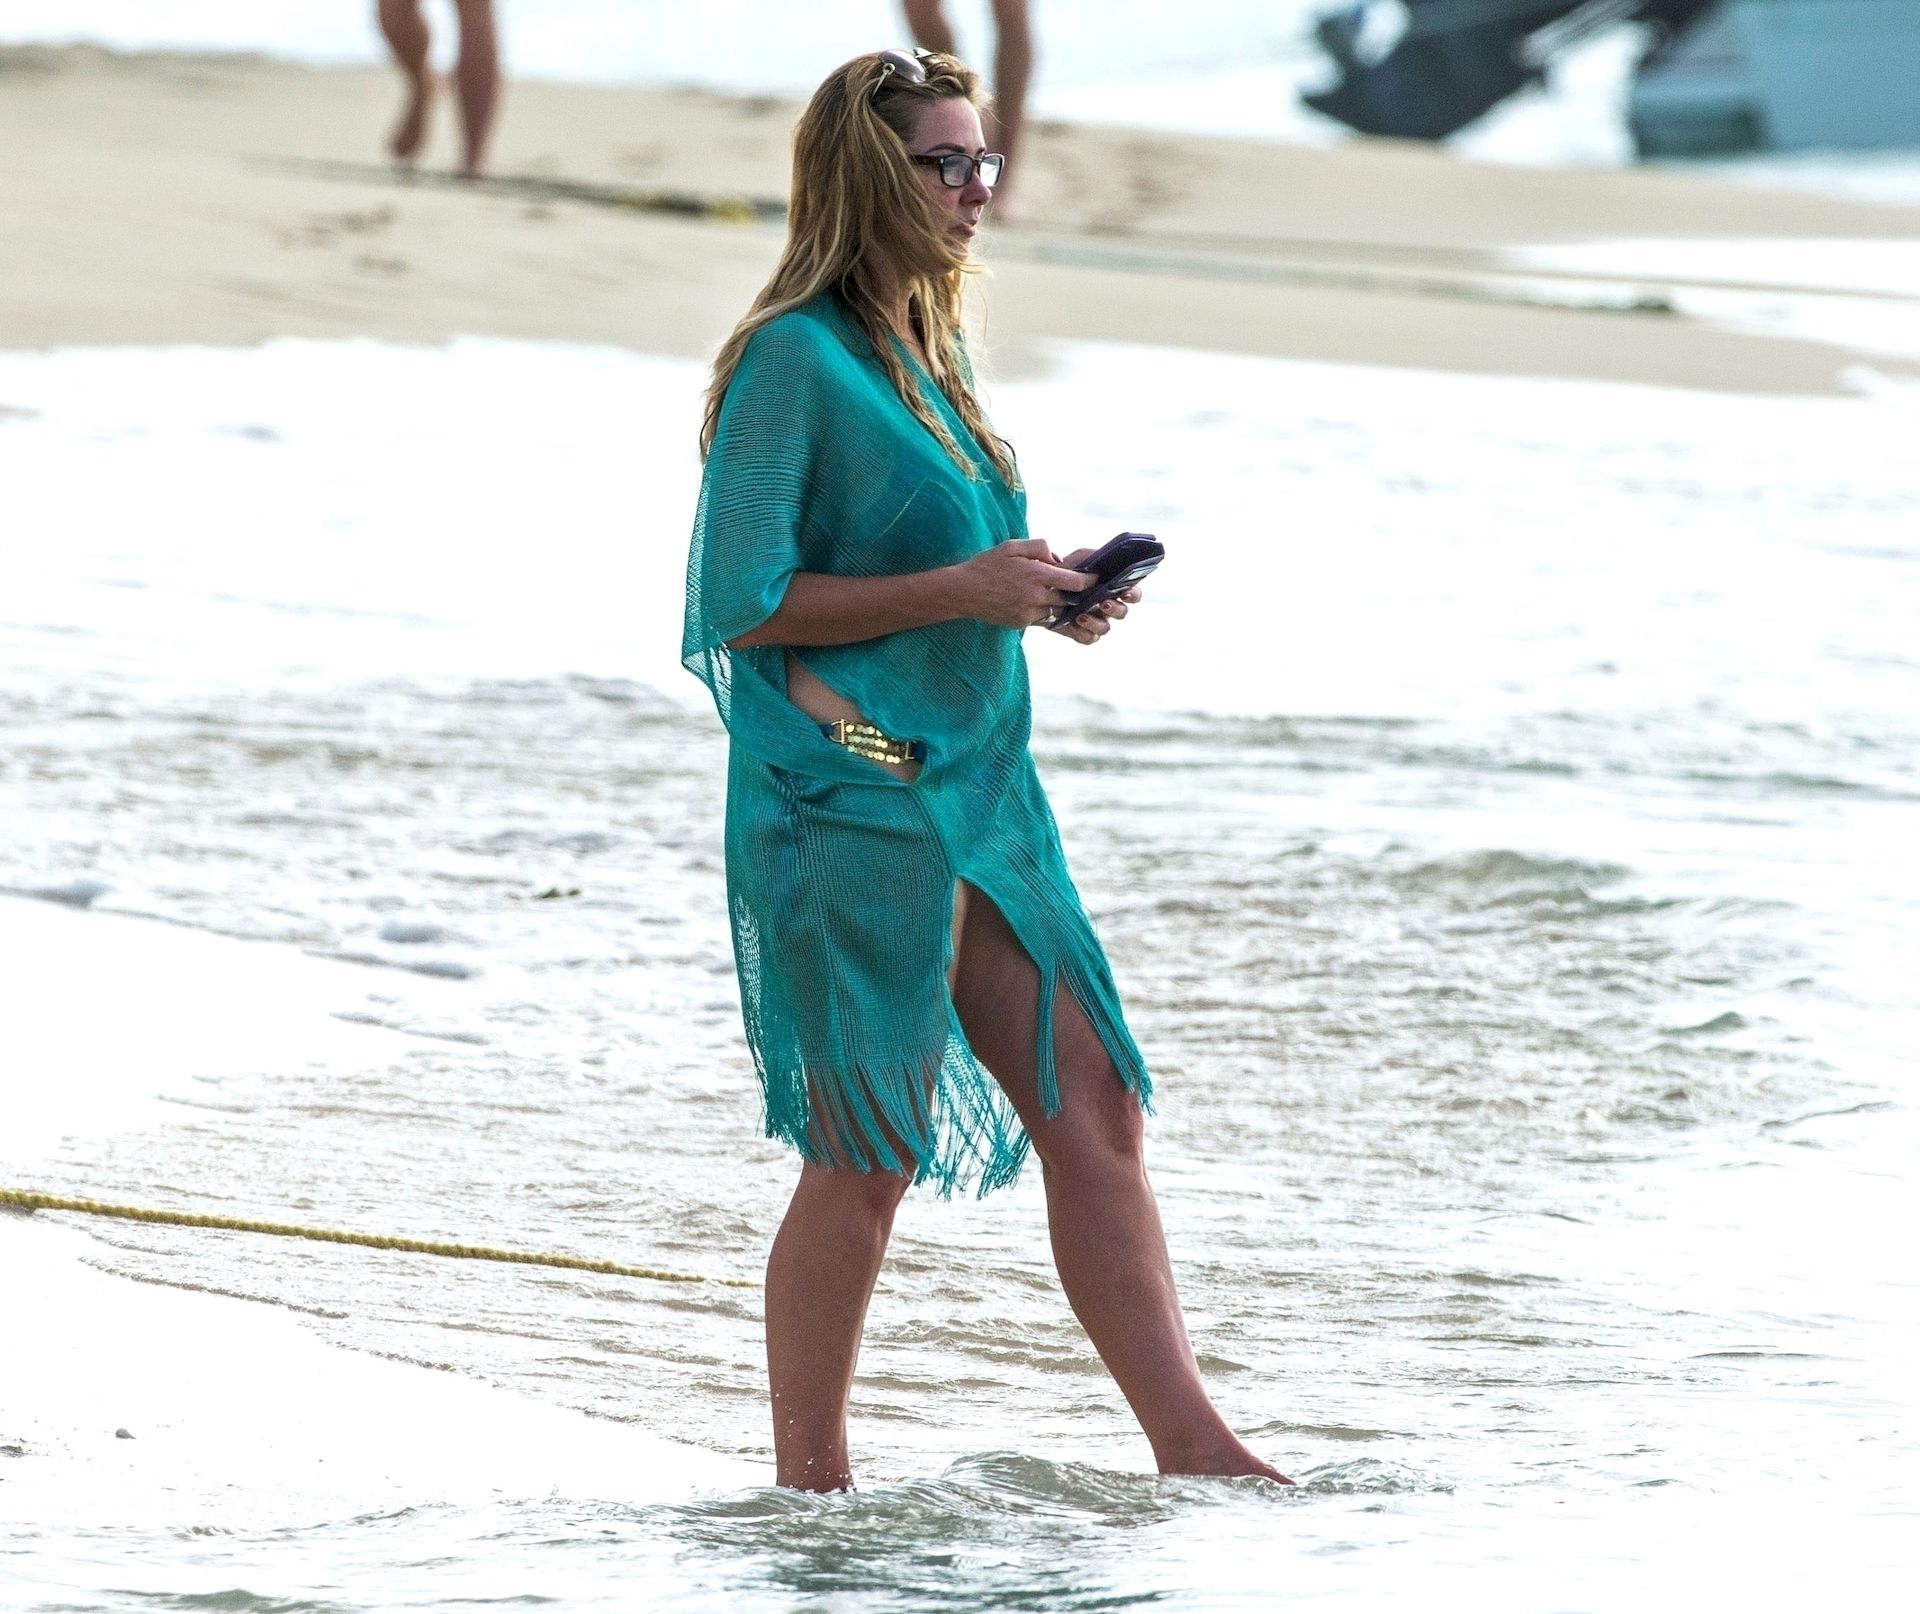 Claire Sweeney Dons Her Bikini Out In Barbados 0013